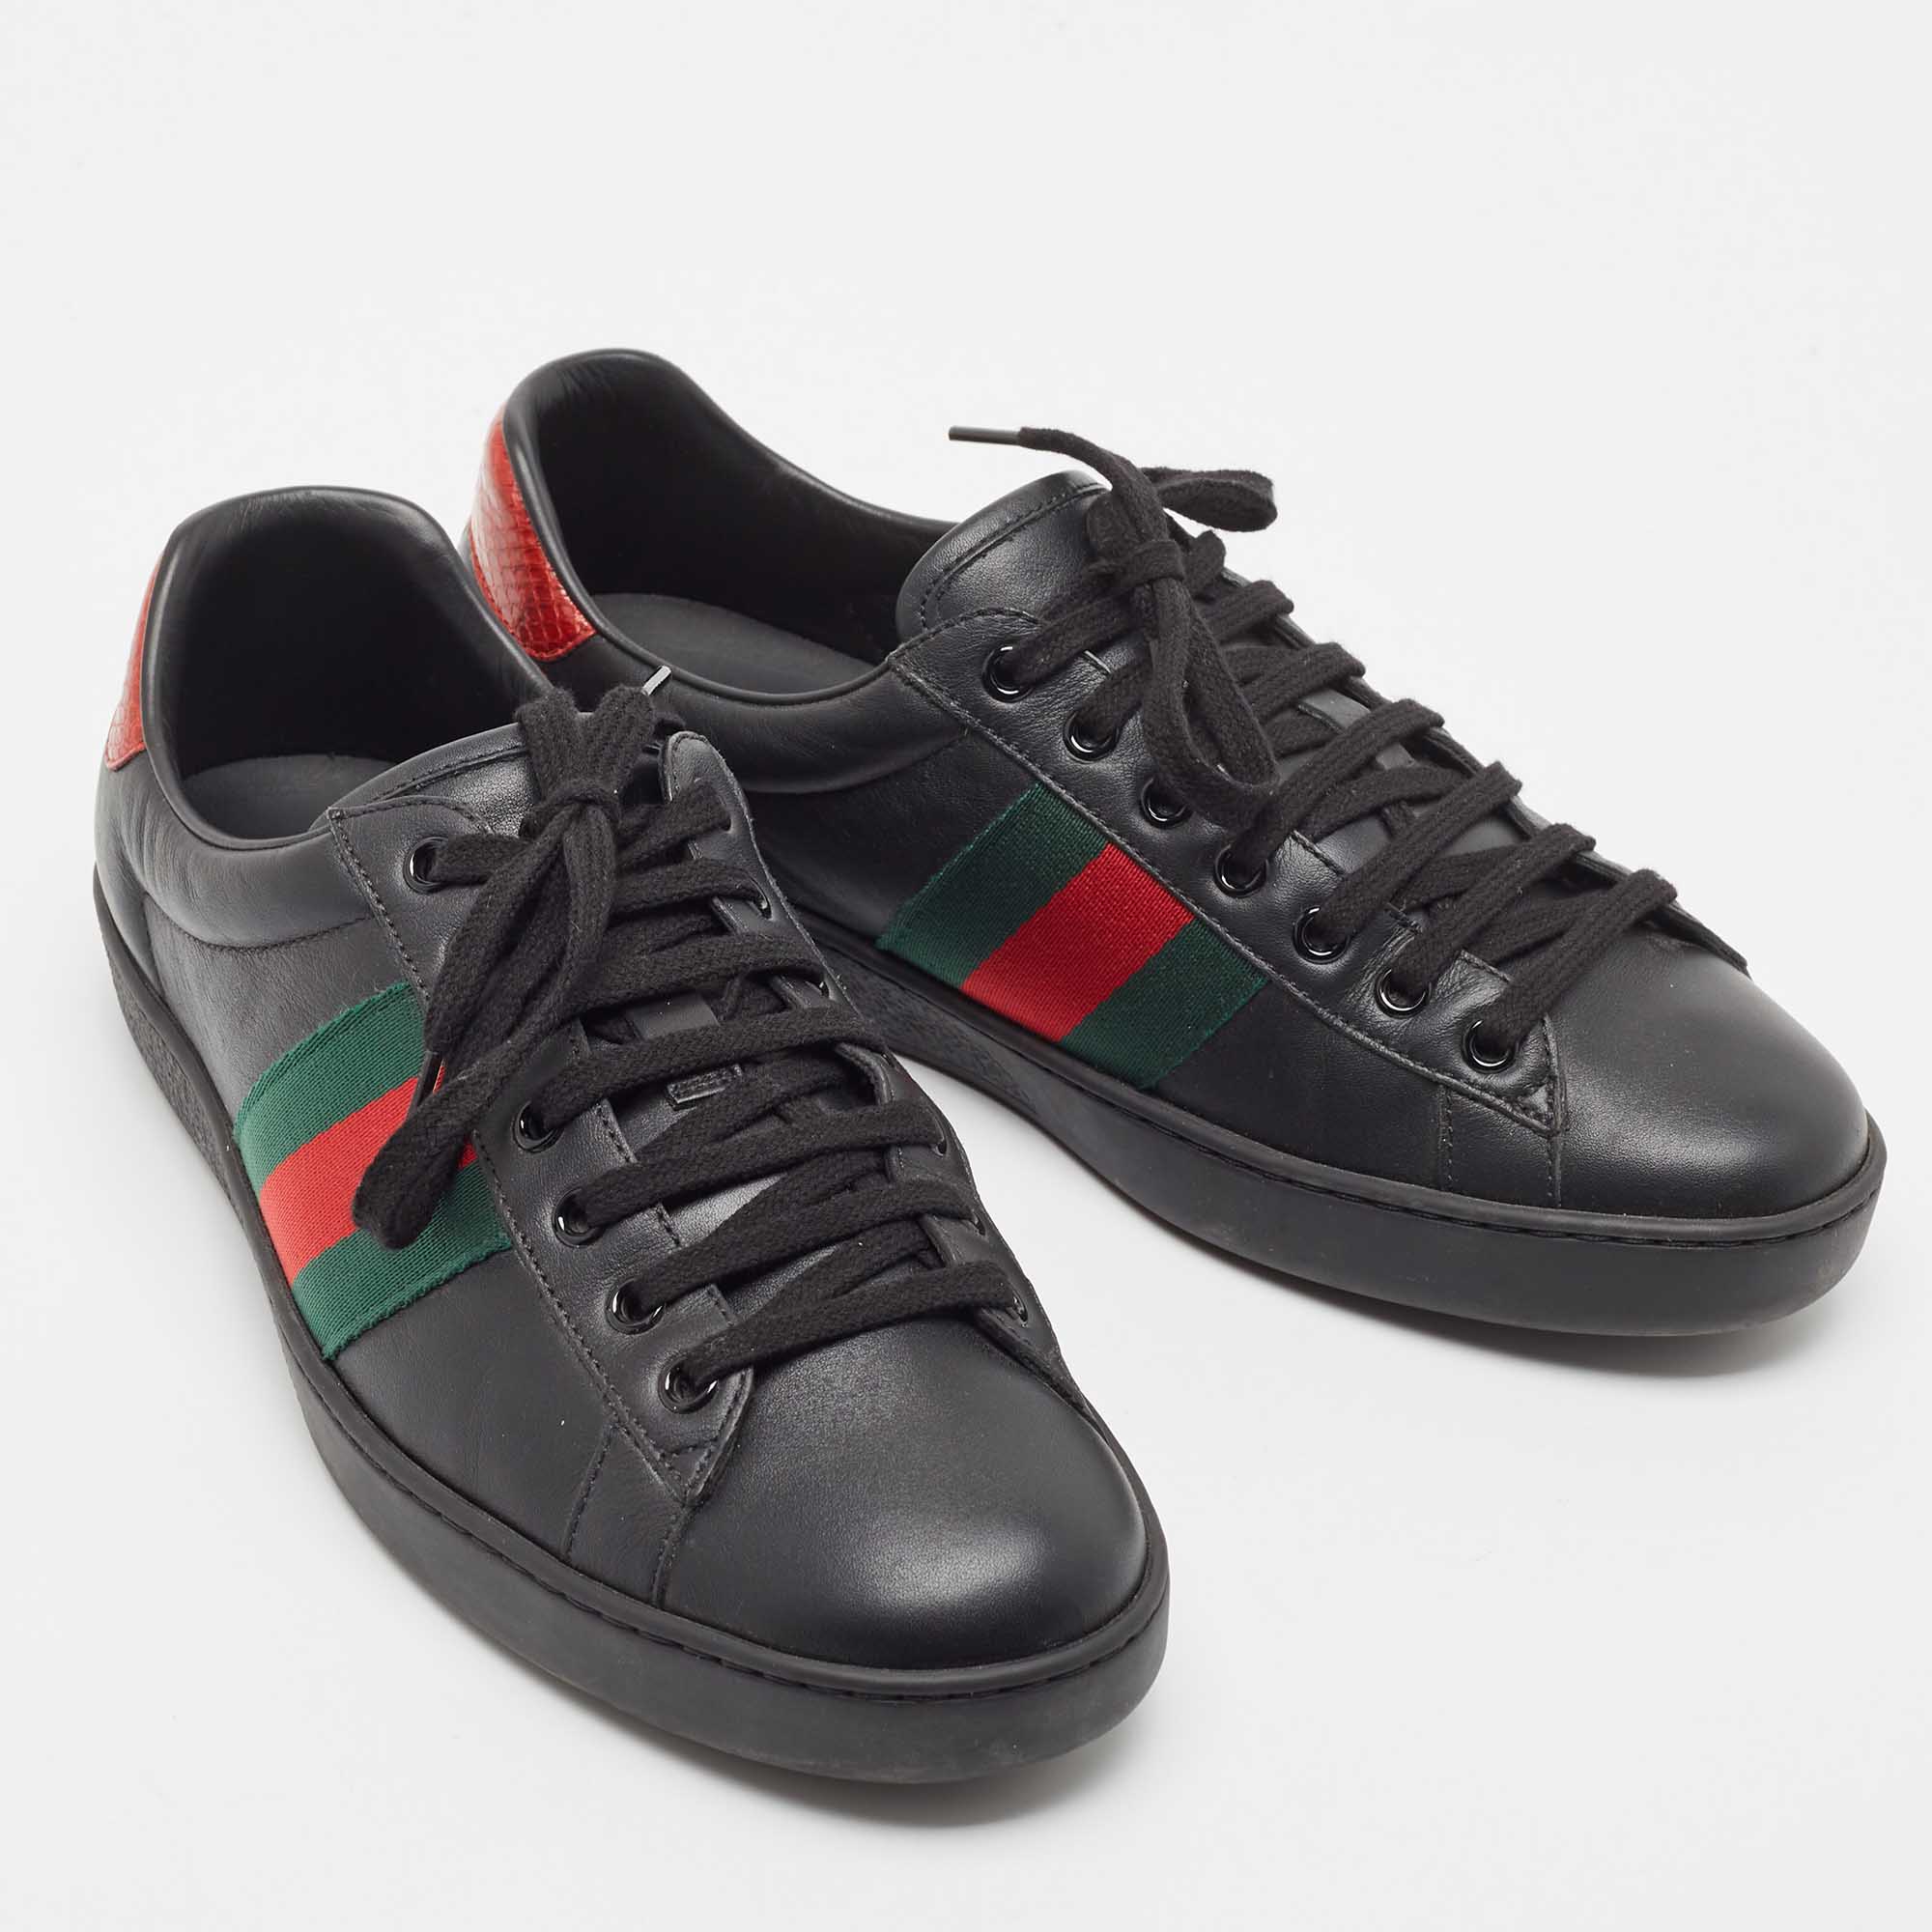 Gucci Black Leather Ace Web Low Top Sneakers Size 41.5